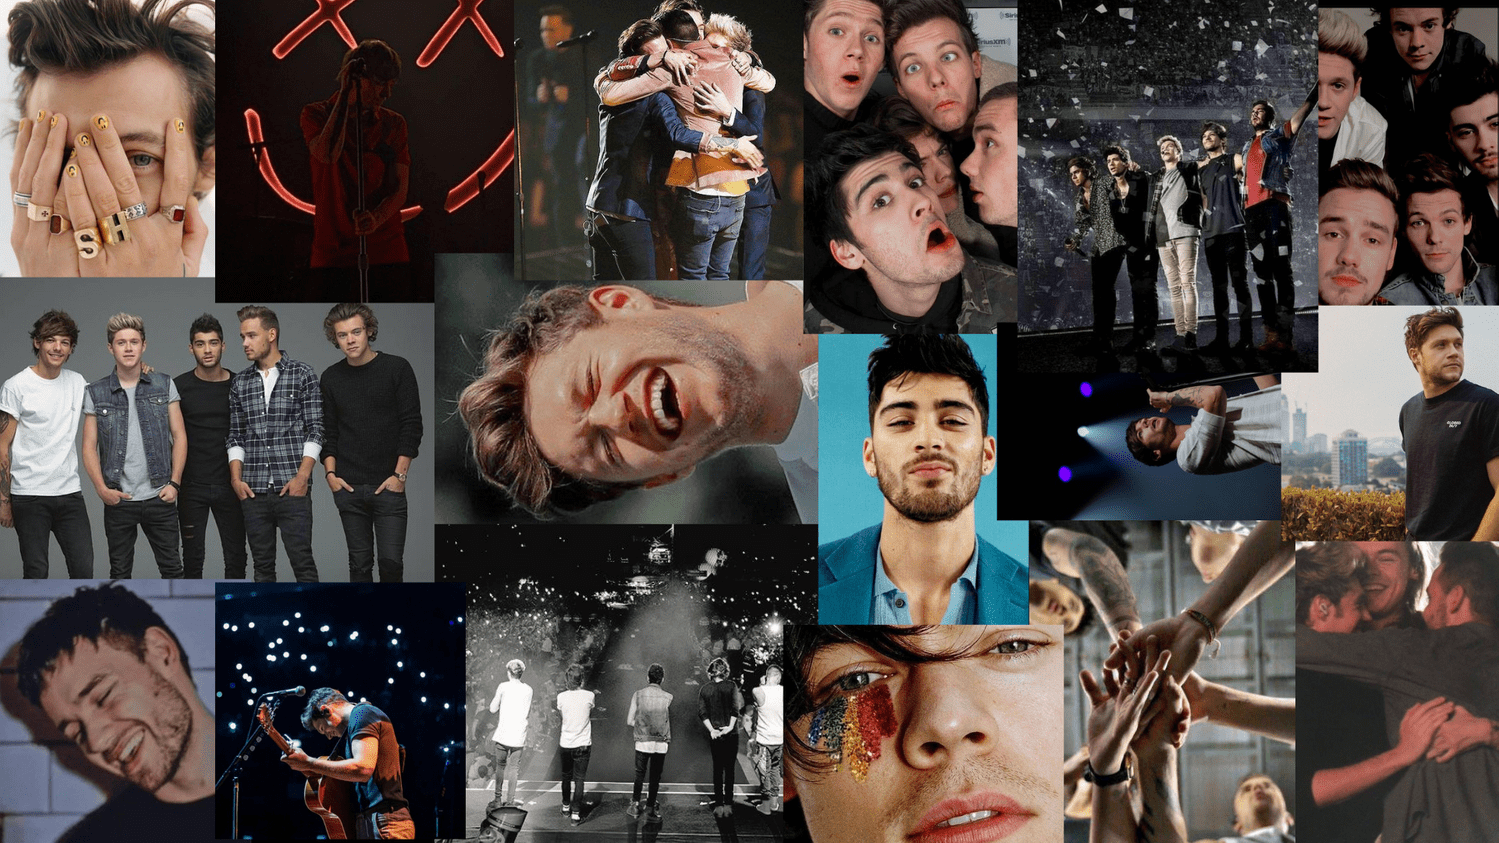 Aesthetic One Direction Pc Wallpaper HD, Wallpaper One Direction Picture and download the most beautiful wallpaper